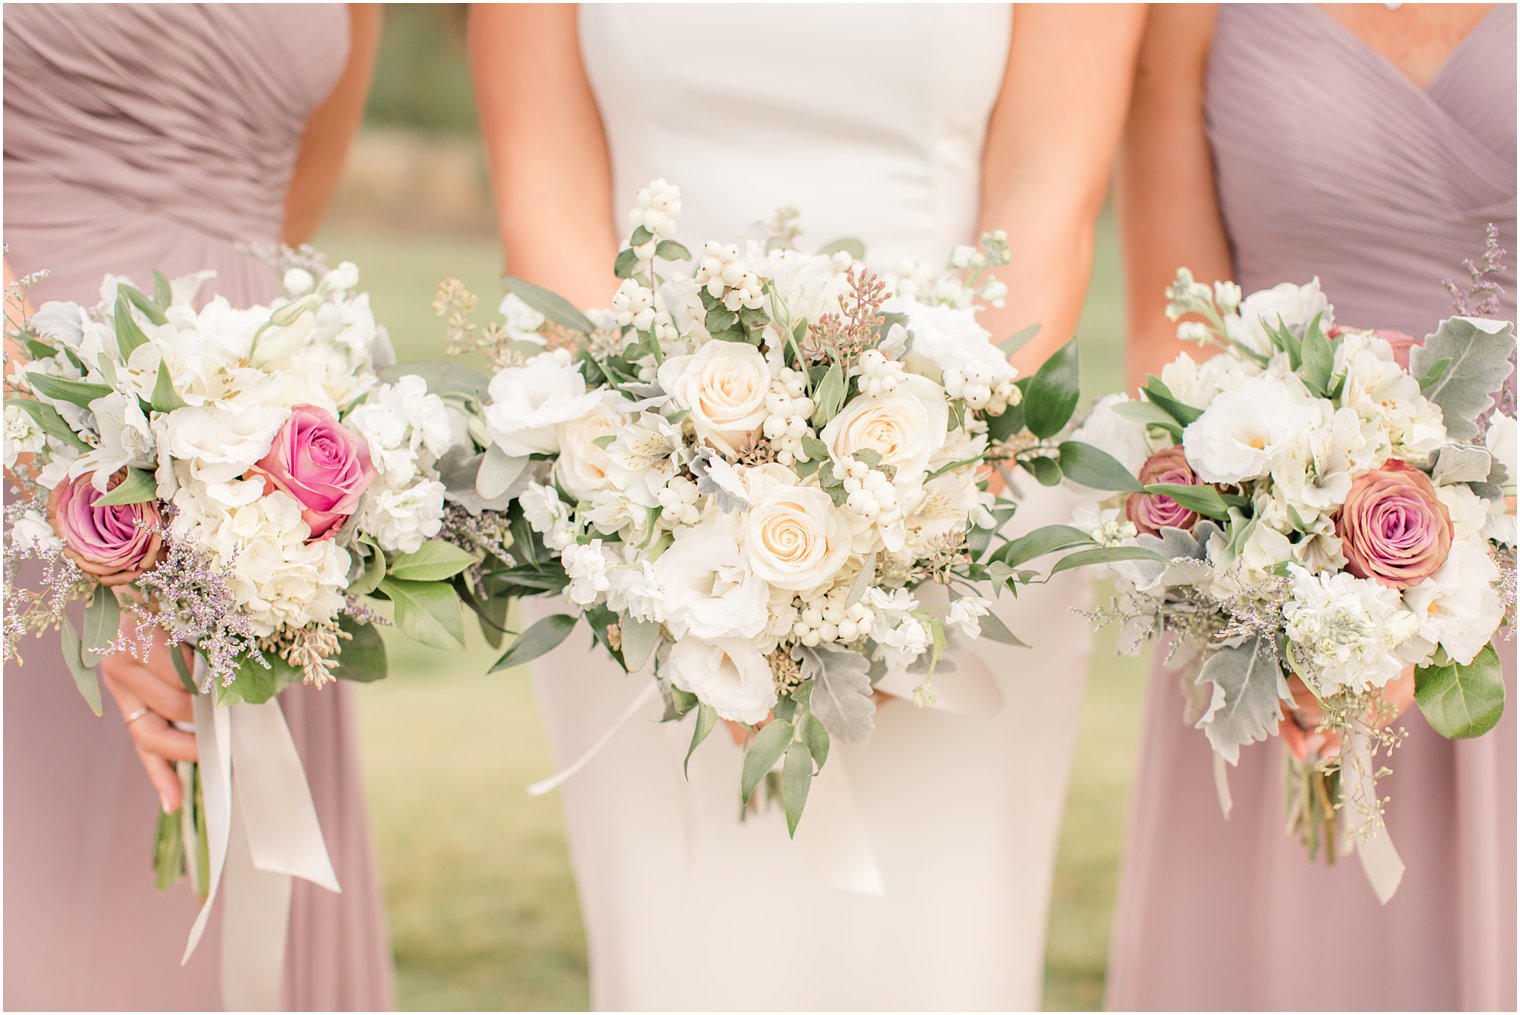 wedding bouquets by Bassett Flowers photographed by Idalia Photography